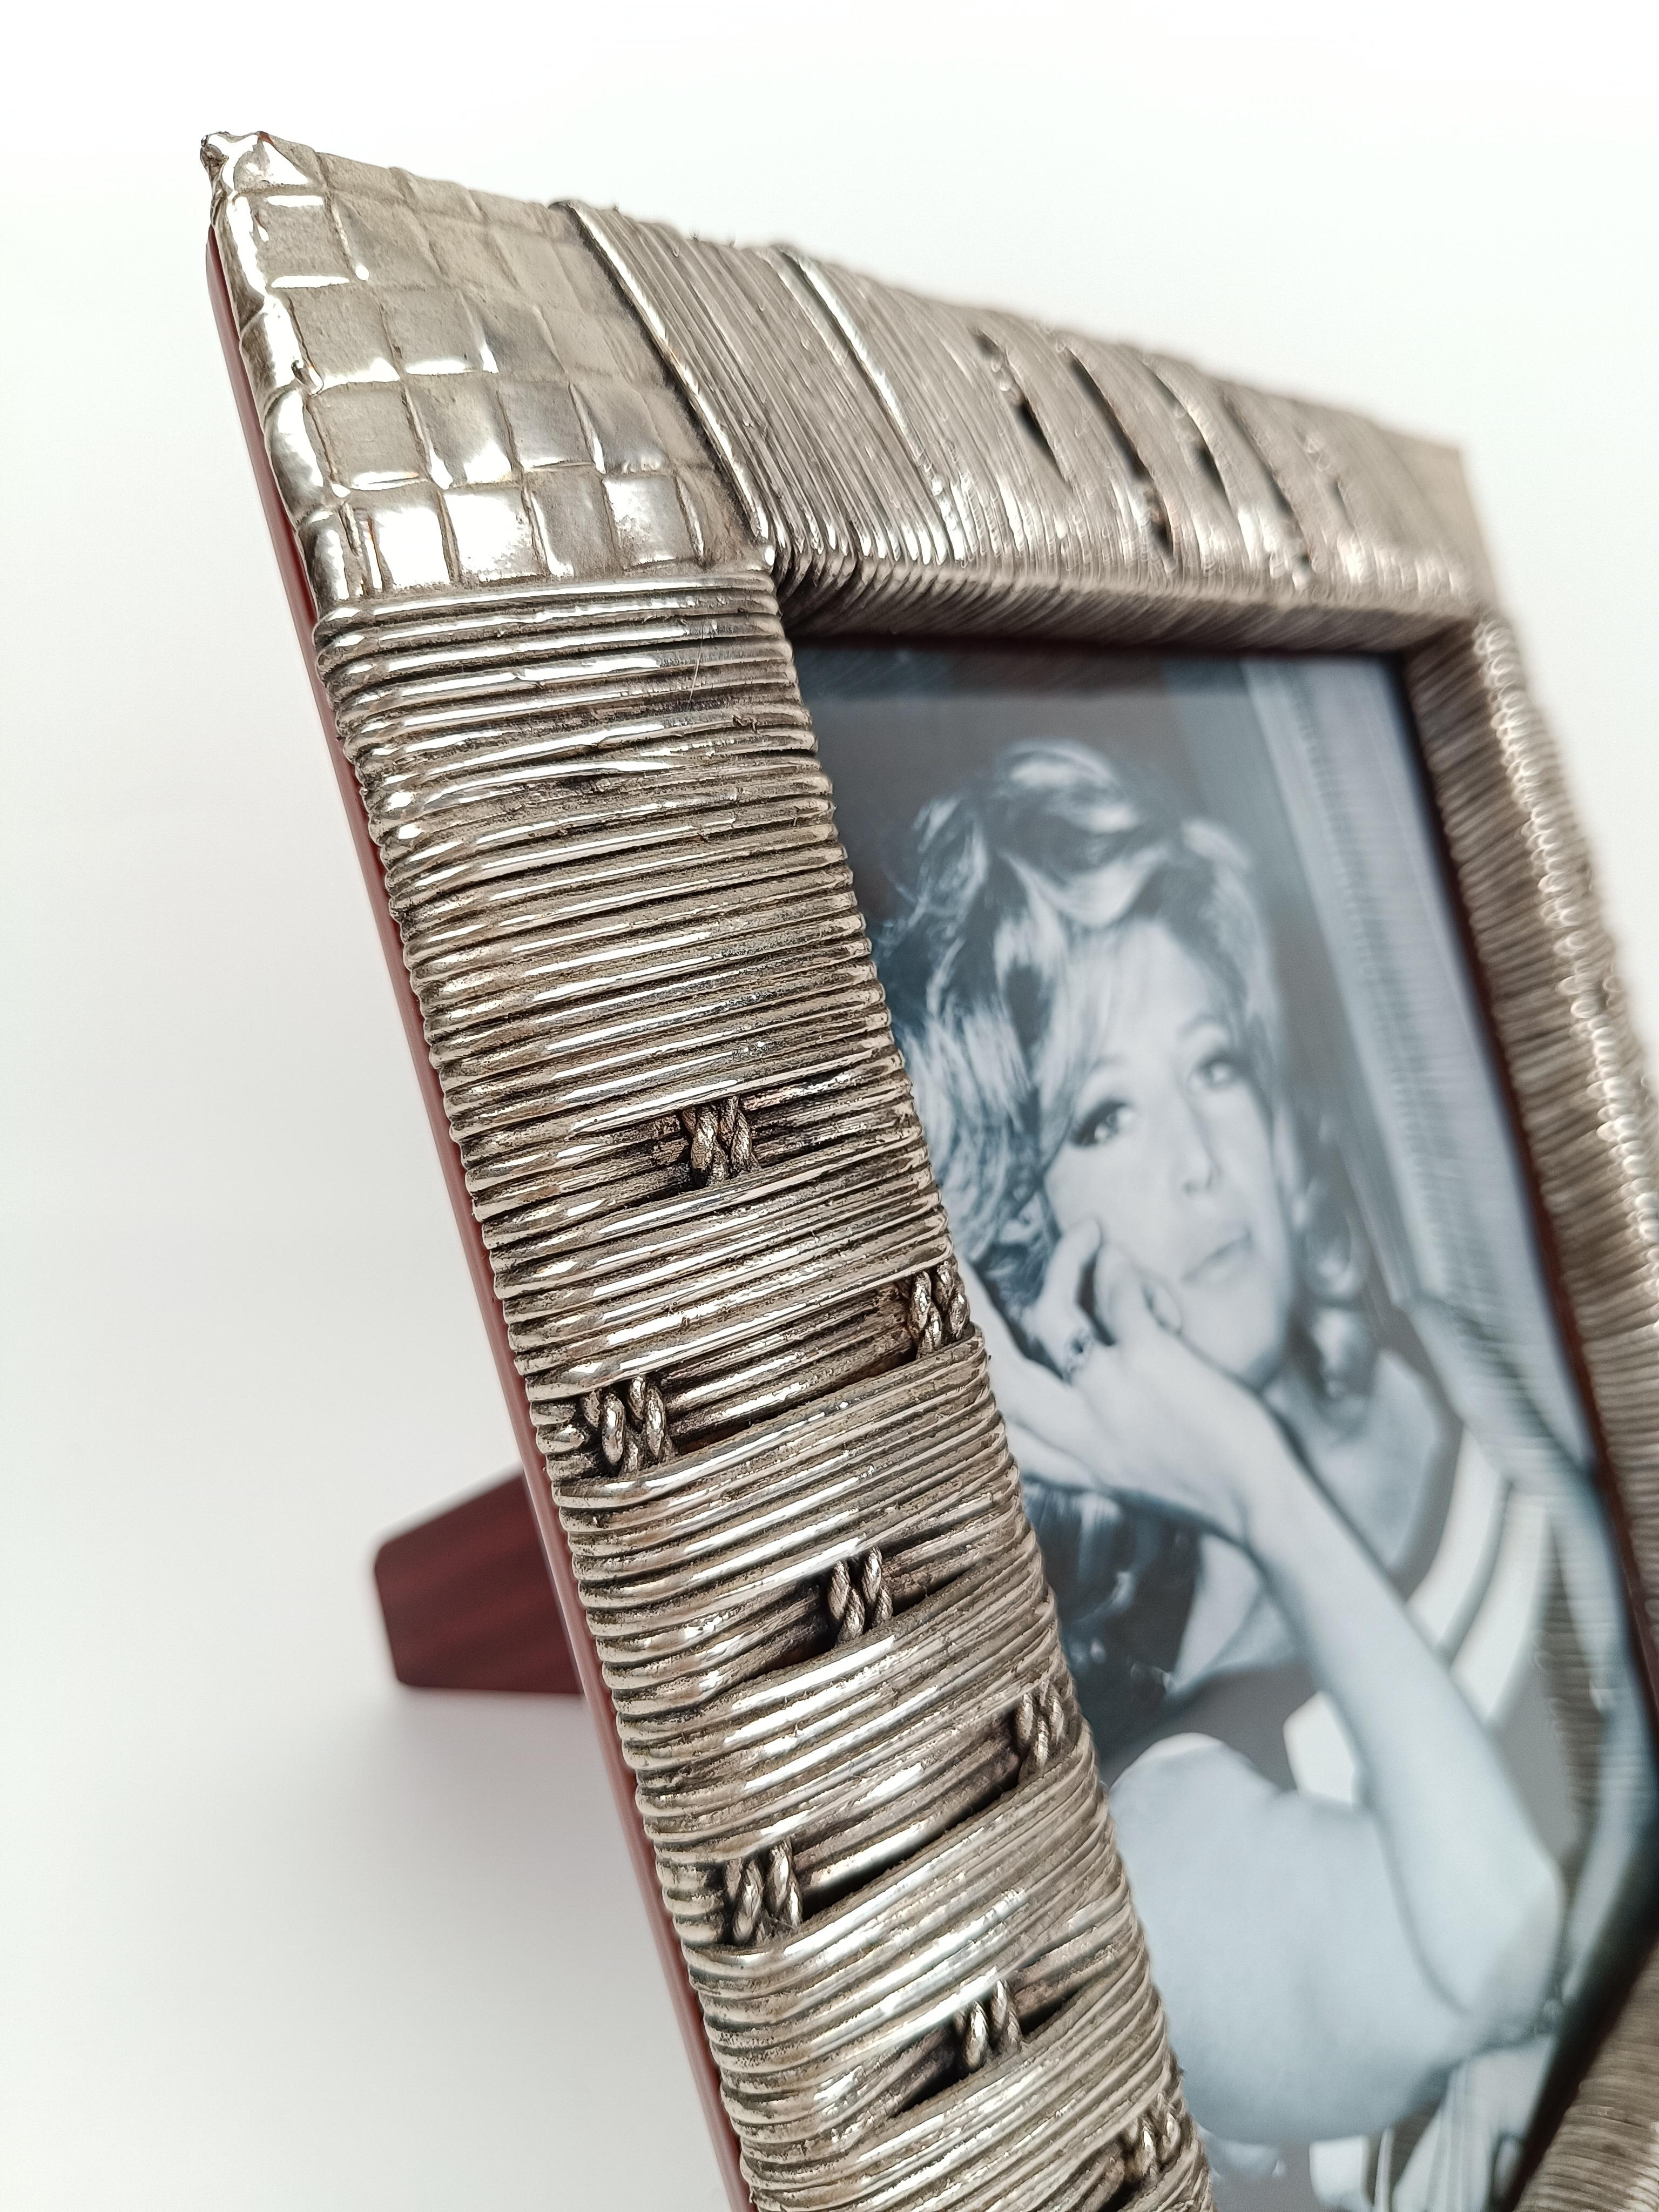 Midcentury Table Picture Frame Made in Silver Plated Woven Wicker, Italy 1970s For Sale 3